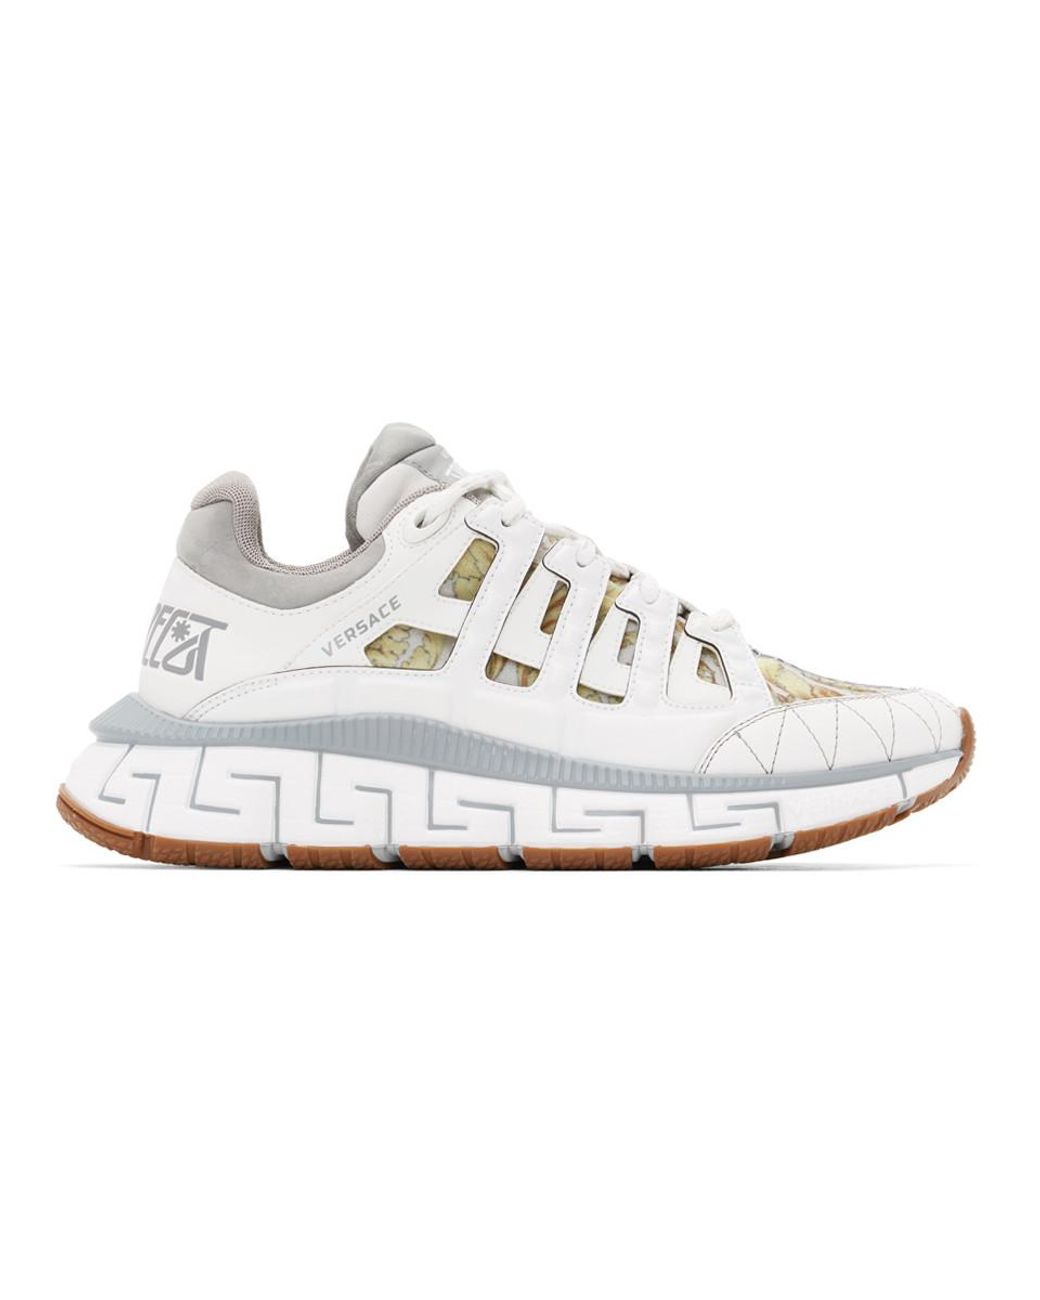 Versace Leather Grey And White Trigreca Sneakers for Men - Lyst